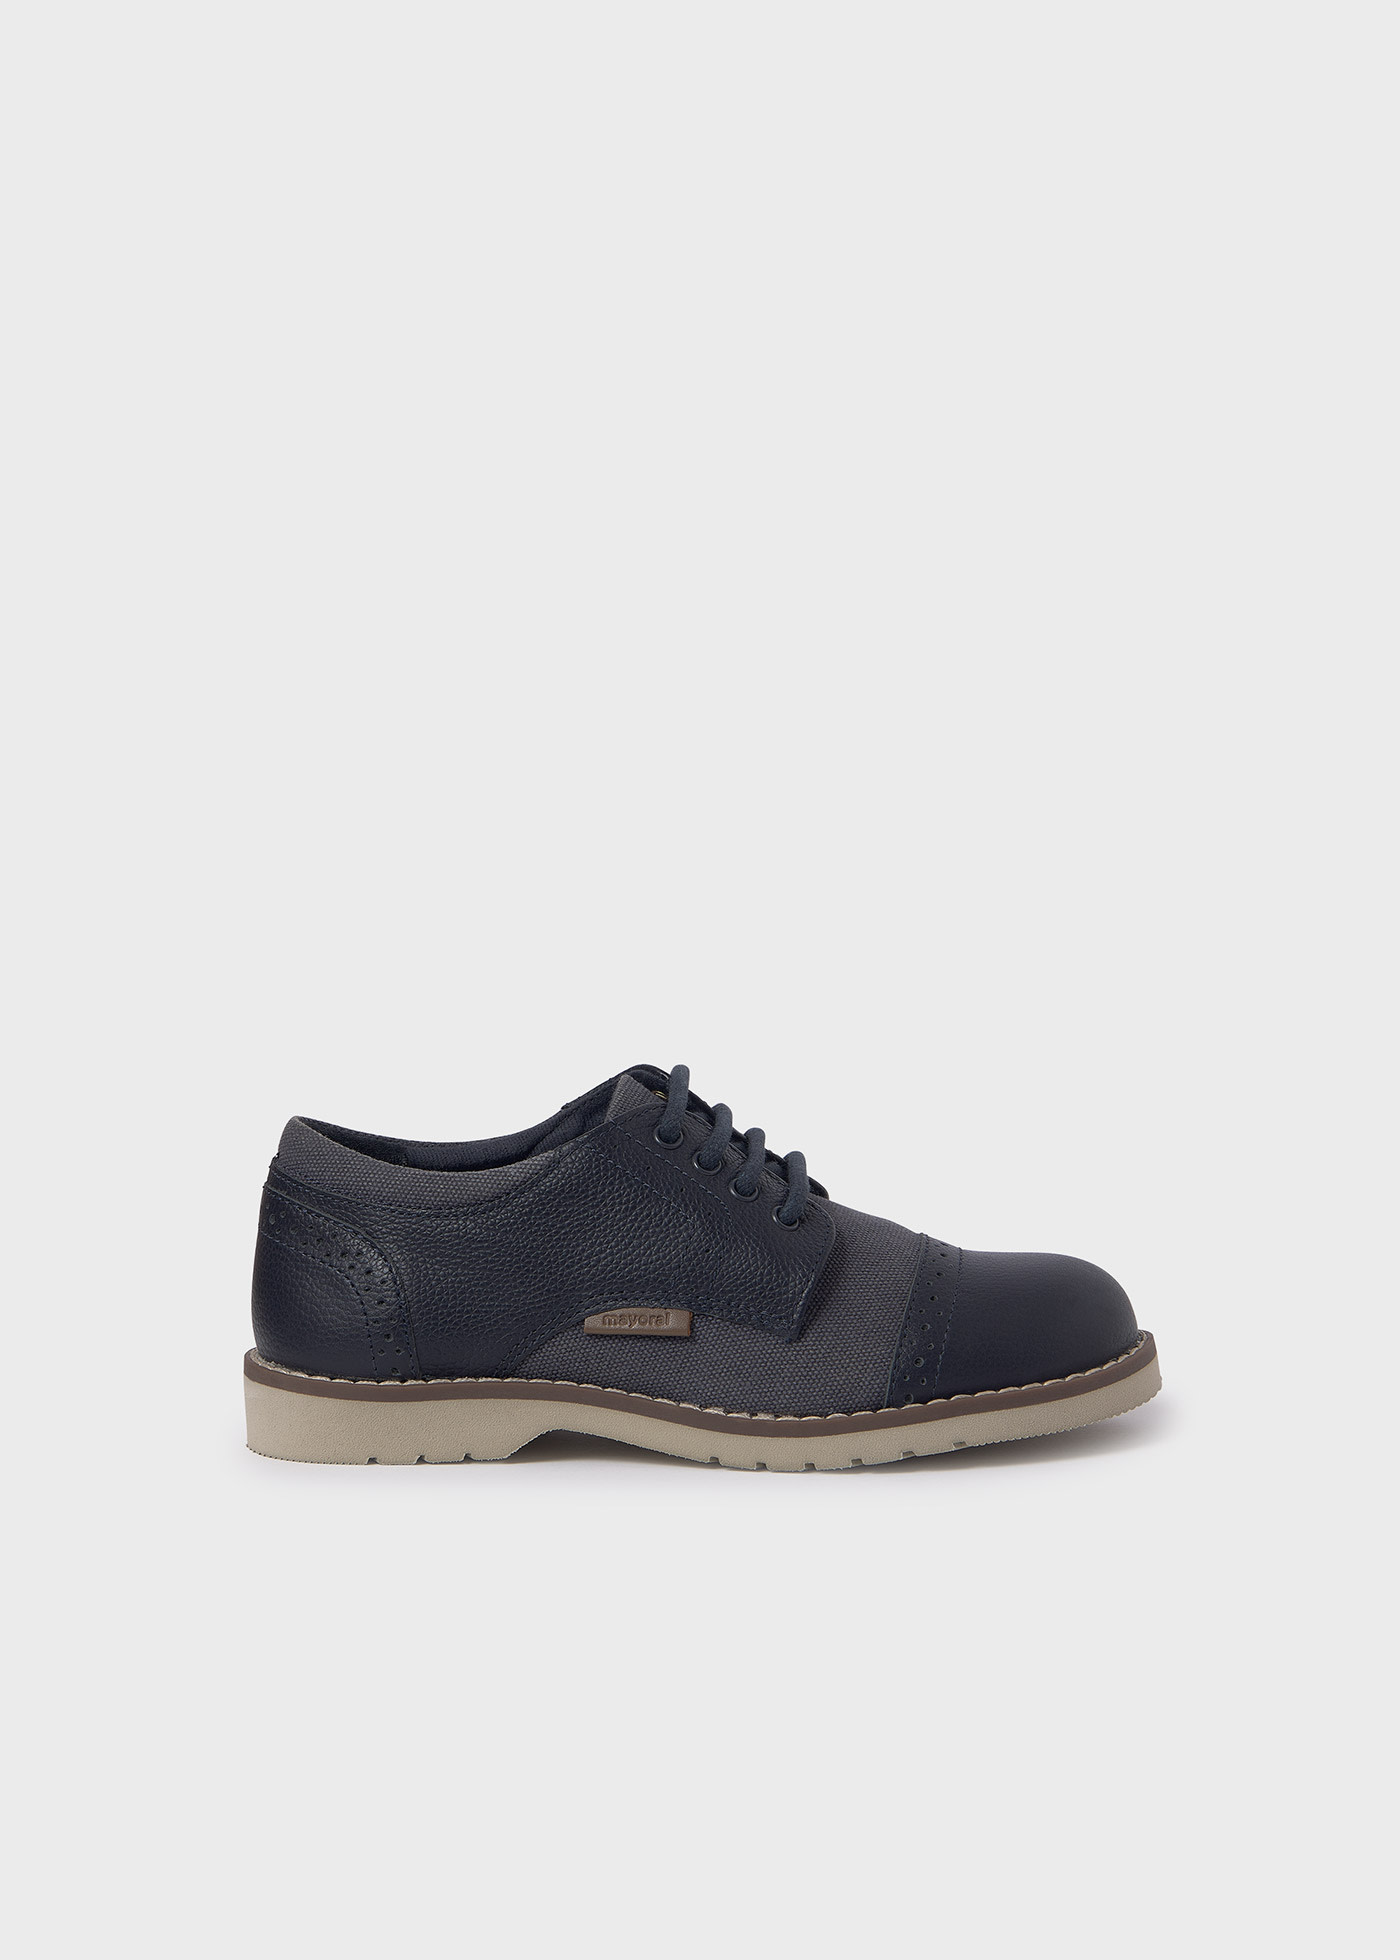 Boys leather oxford shoes